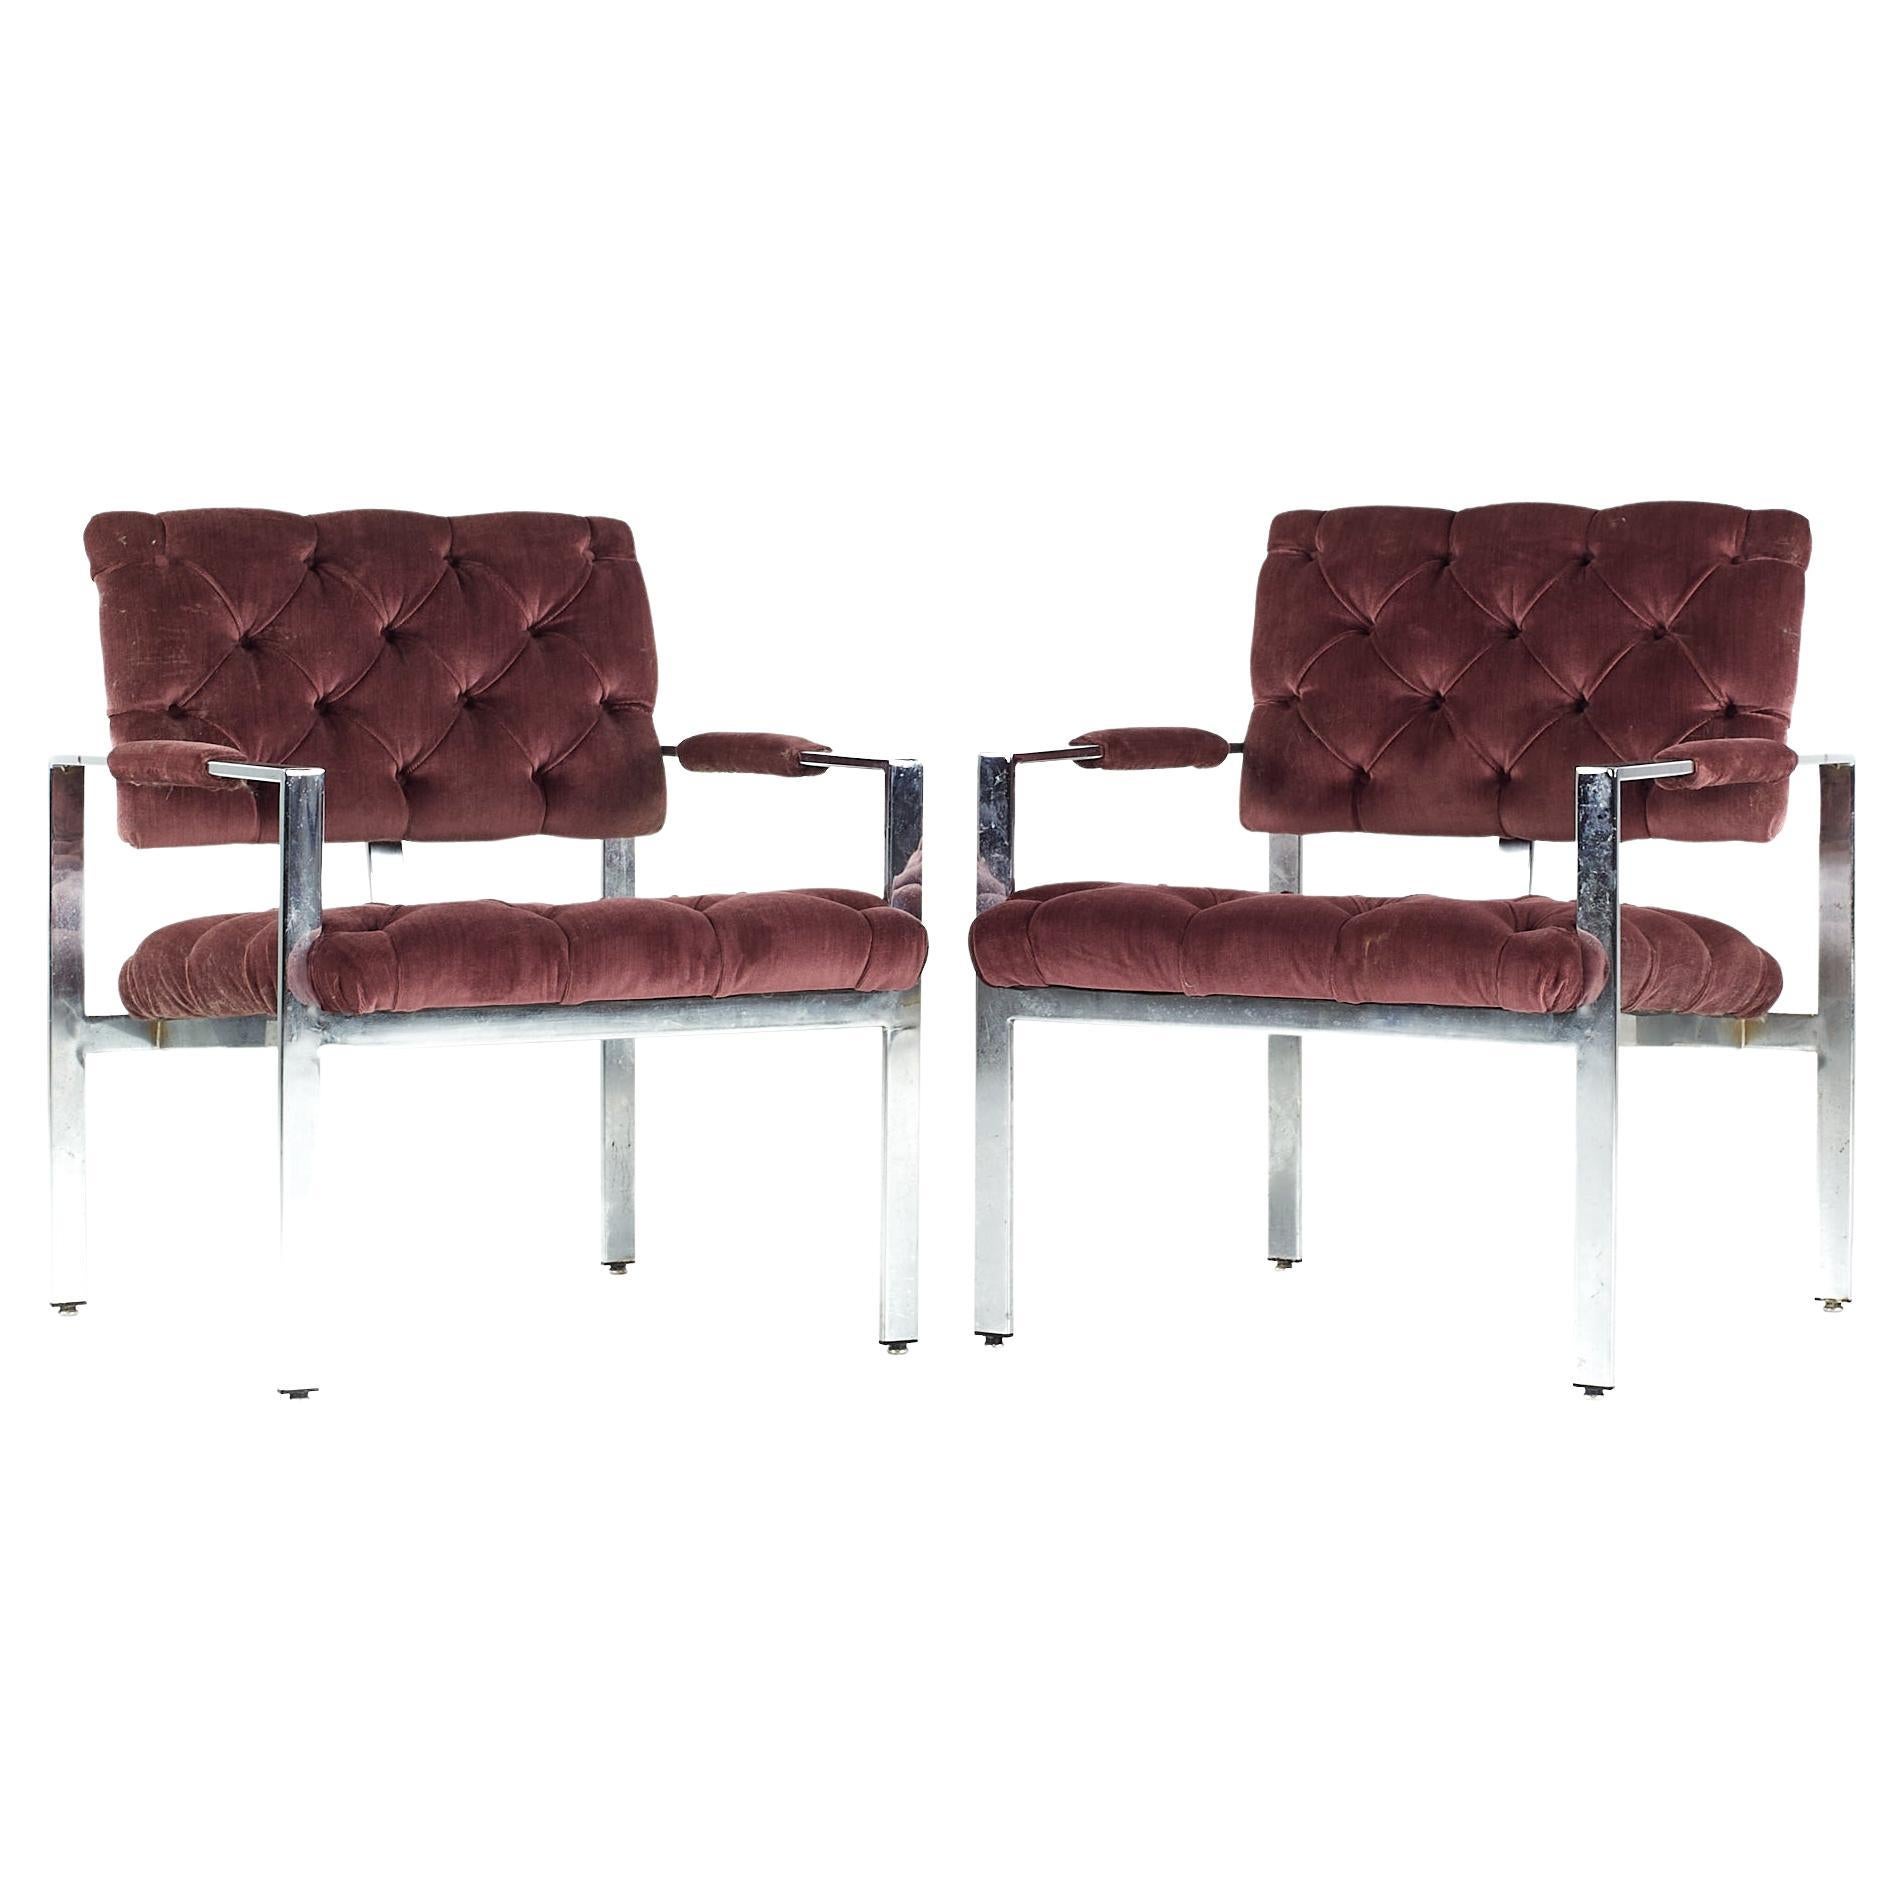 Milo Baughman for Thayer Coggin Midcentury Chrome Tufted Arm Chairs, Pair For Sale